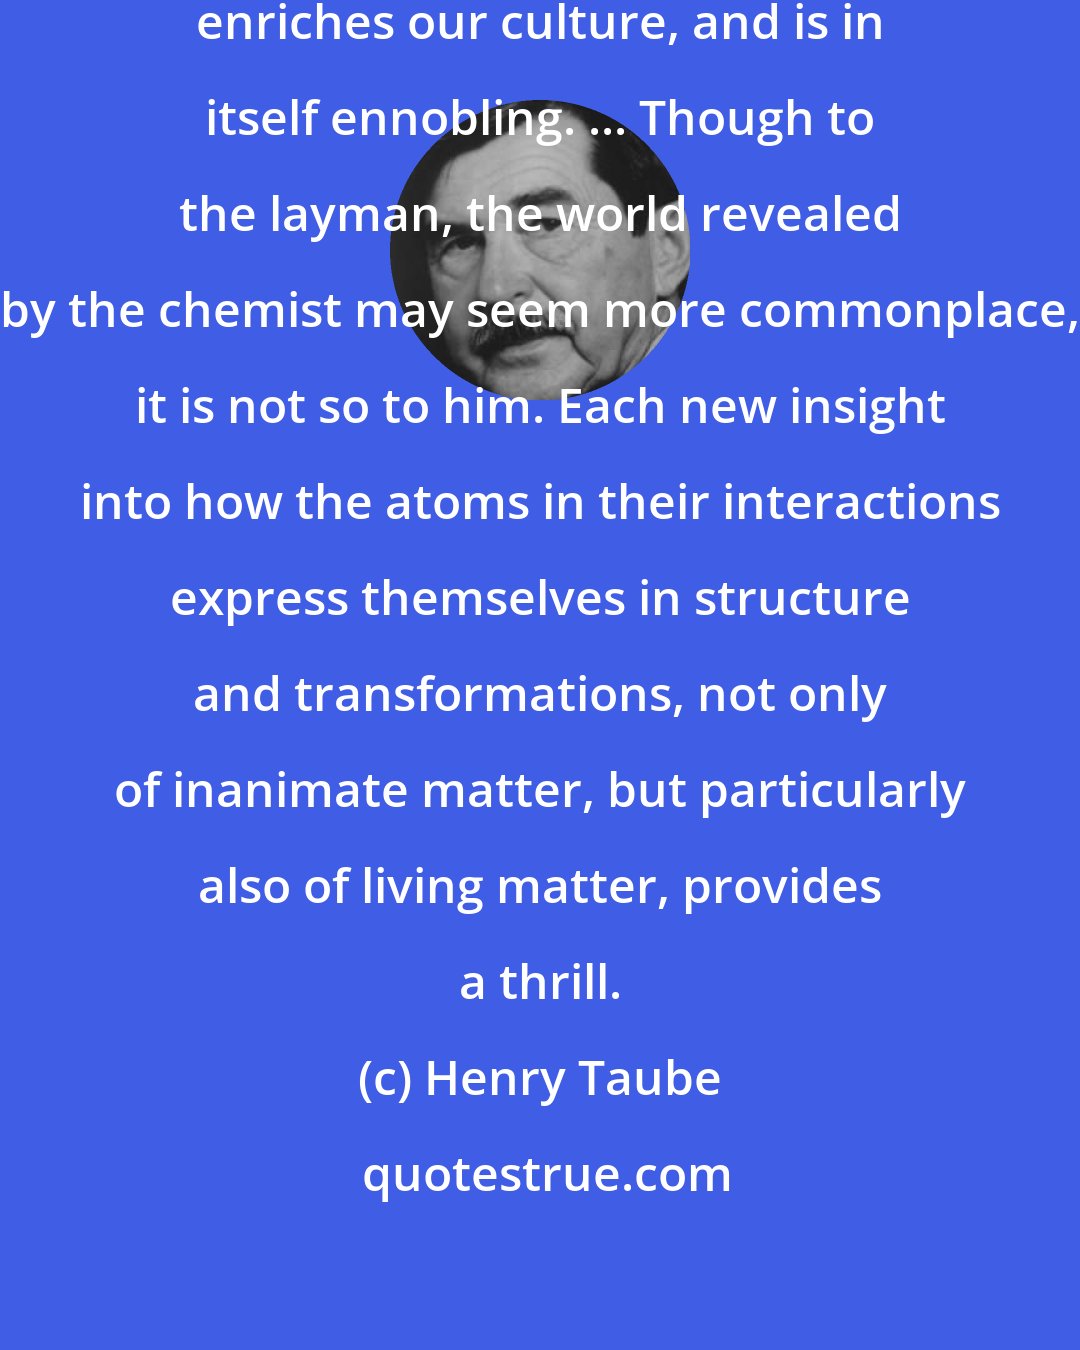 Henry Taube: Science as an intellectual exercise enriches our culture, and is in itself ennobling. ... Though to the layman, the world revealed by the chemist may seem more commonplace, it is not so to him. Each new insight into how the atoms in their interactions express themselves in structure and transformations, not only of inanimate matter, but particularly also of living matter, provides a thrill.